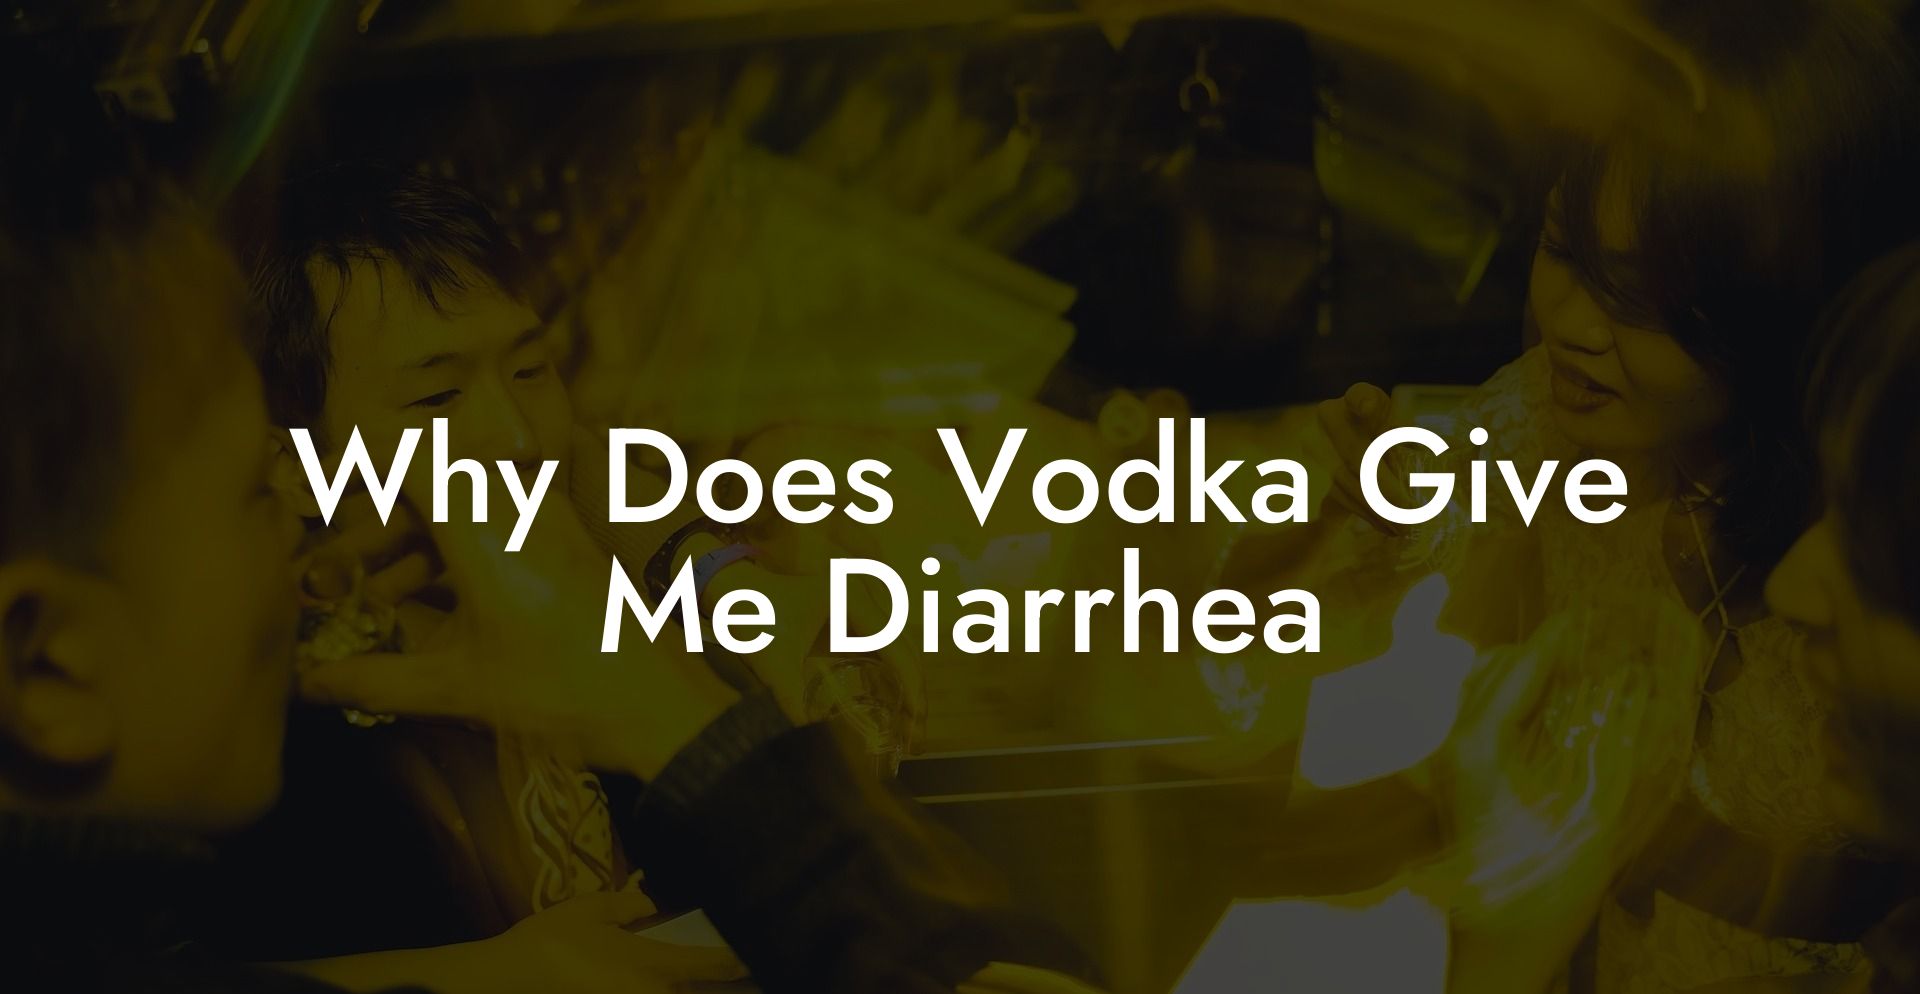 Why Does Vodka Give Me Diarrhea